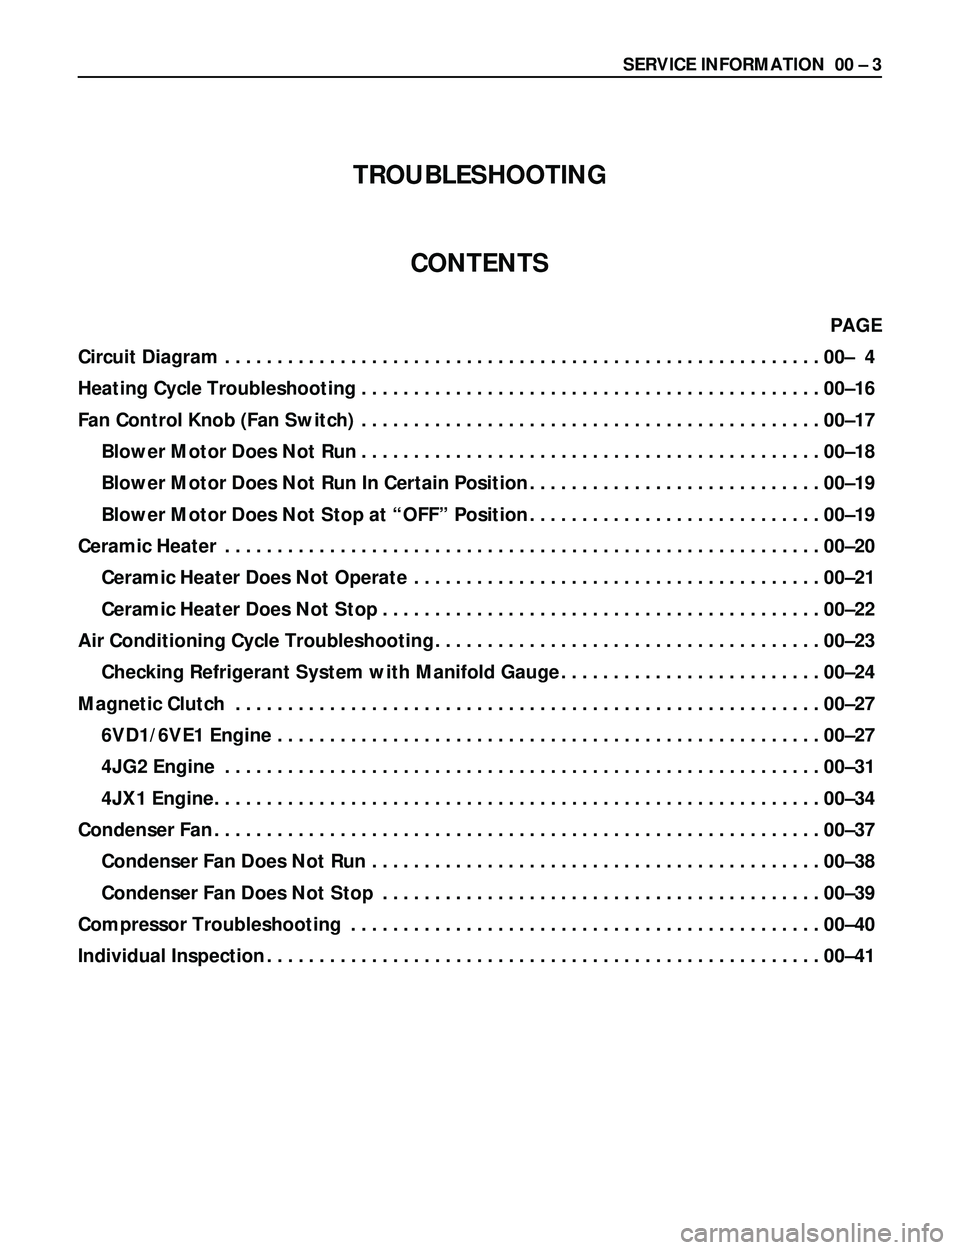 ISUZU TROOPER 1998  Service Repair Manual SERVICE INFORMATION  00 Ð 3
TROUBLESHOOTING
CONTENTS
PAGE 
Circuit Diagram.........................................................00Ð 4
Heating Cycle Troubleshooting................................